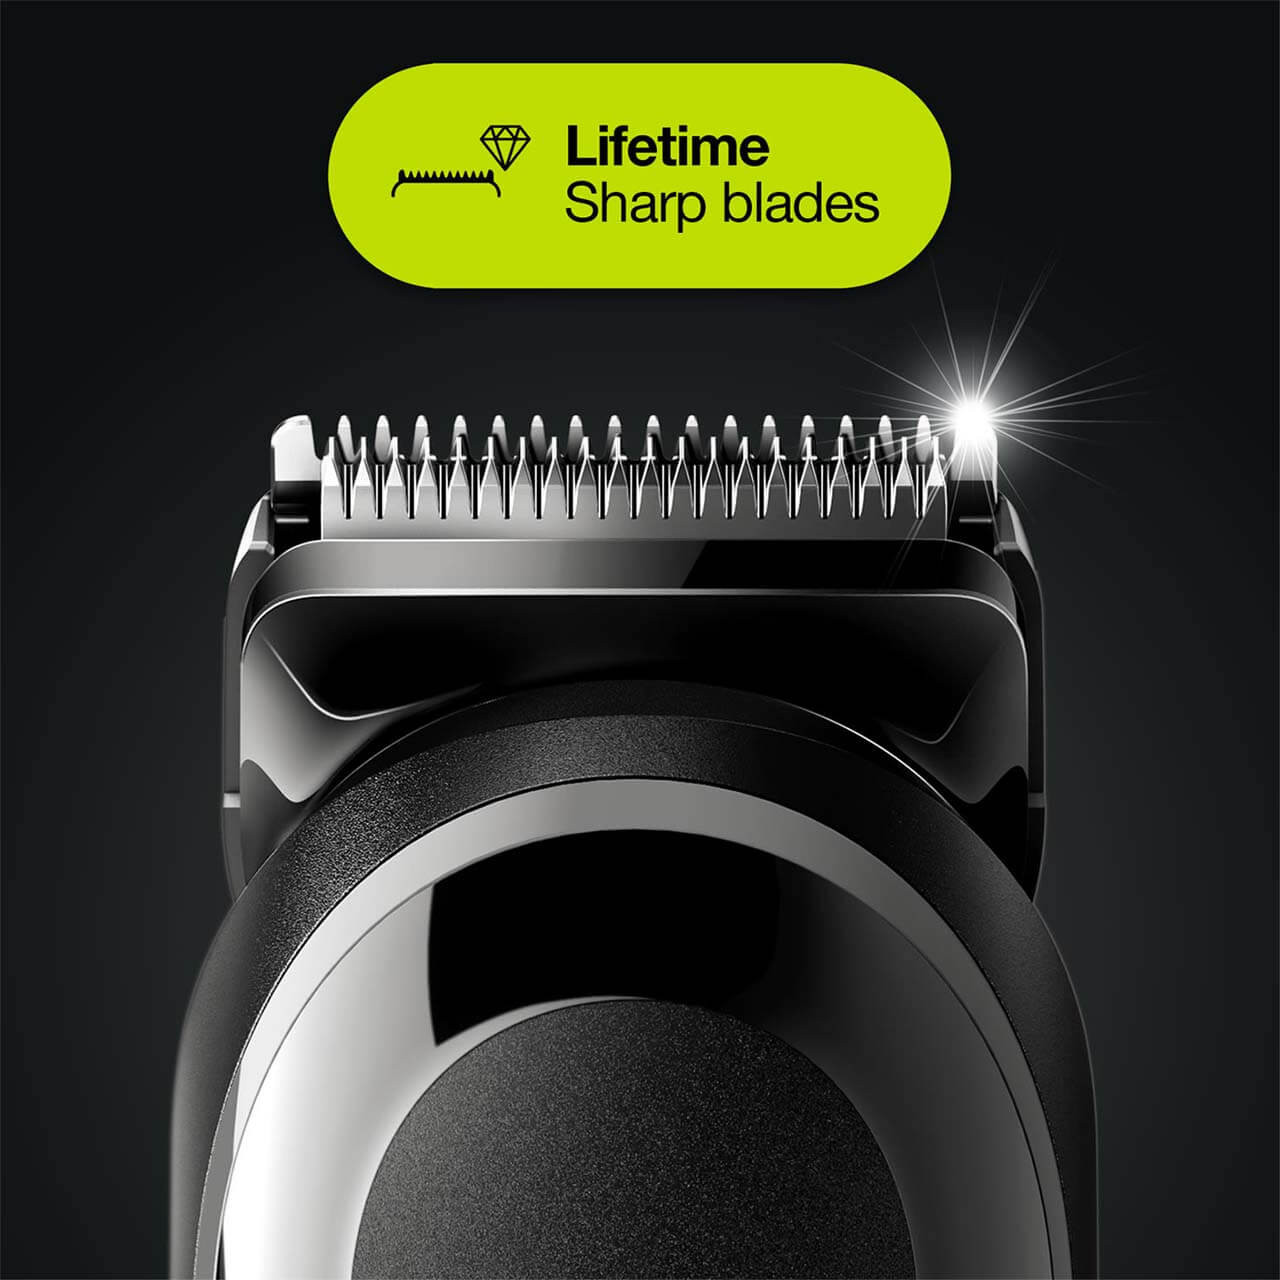 All-in-One trimmer 3 and Body, Black 6-in-1 styling Face, Hair, kit, for